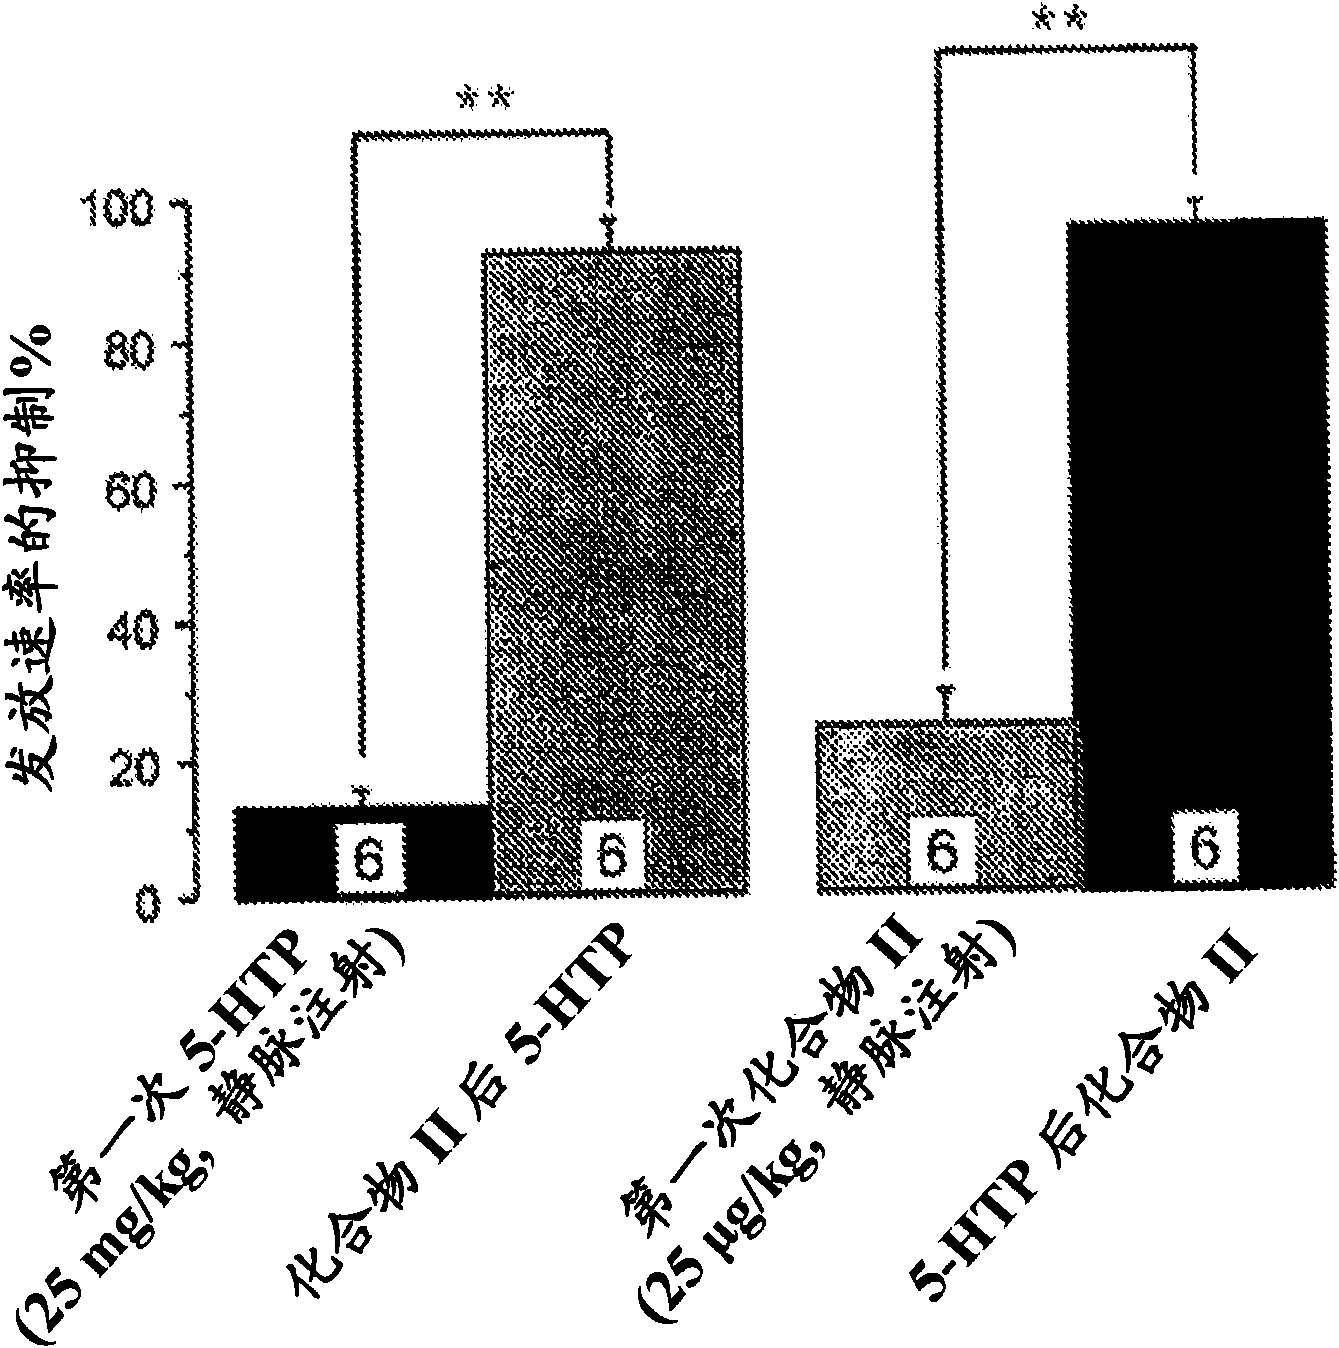 Combination therapy related to serotonin dual action compounds